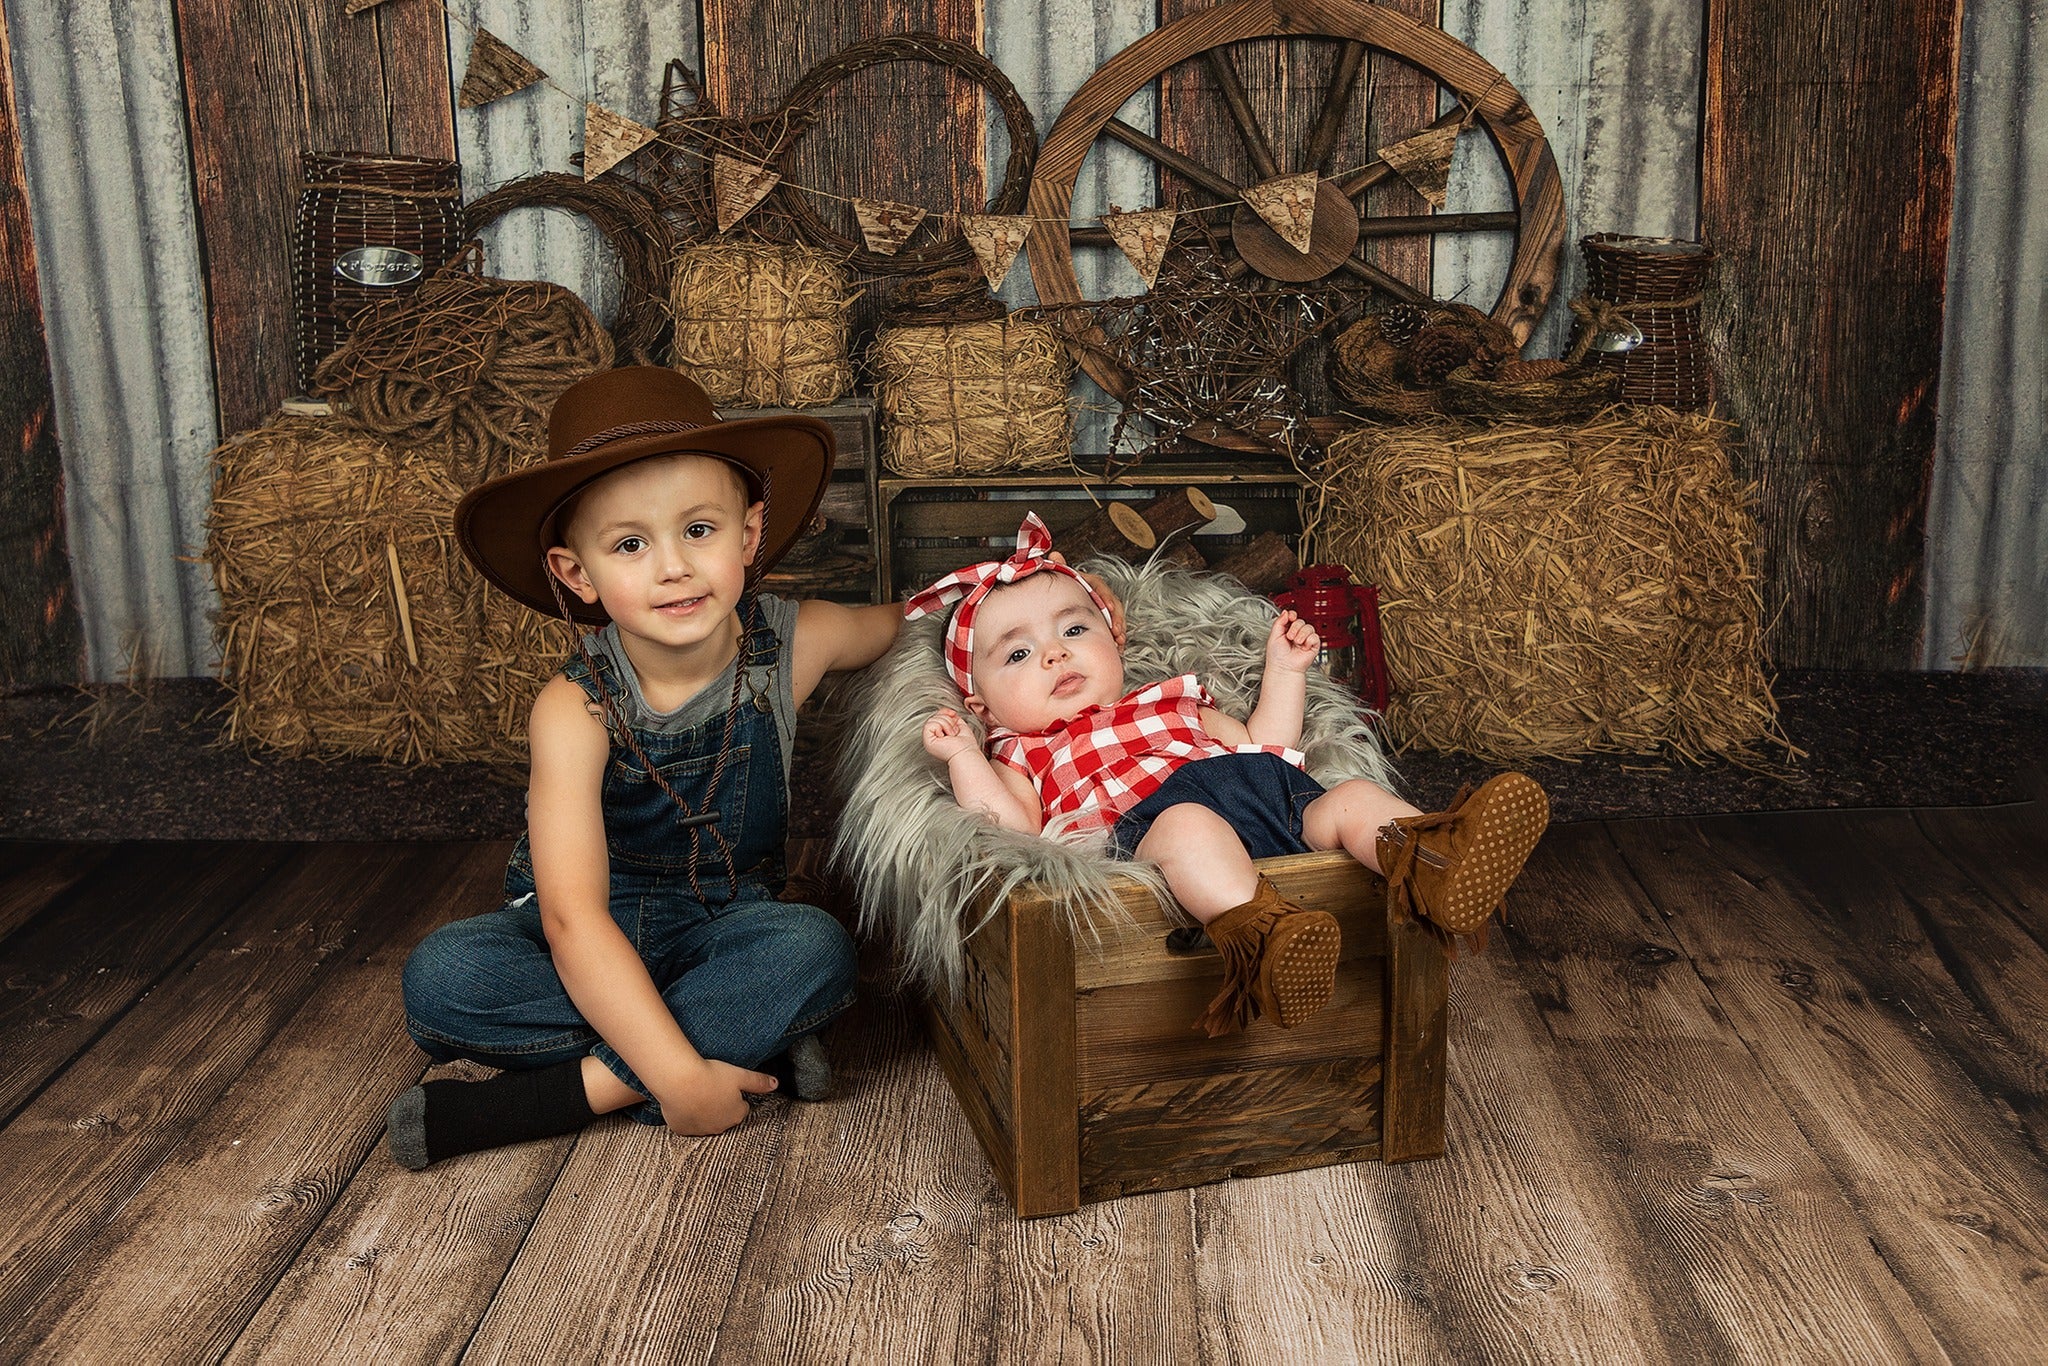 Kate Retro Autumn Backdrop Haystack Wood for Photography